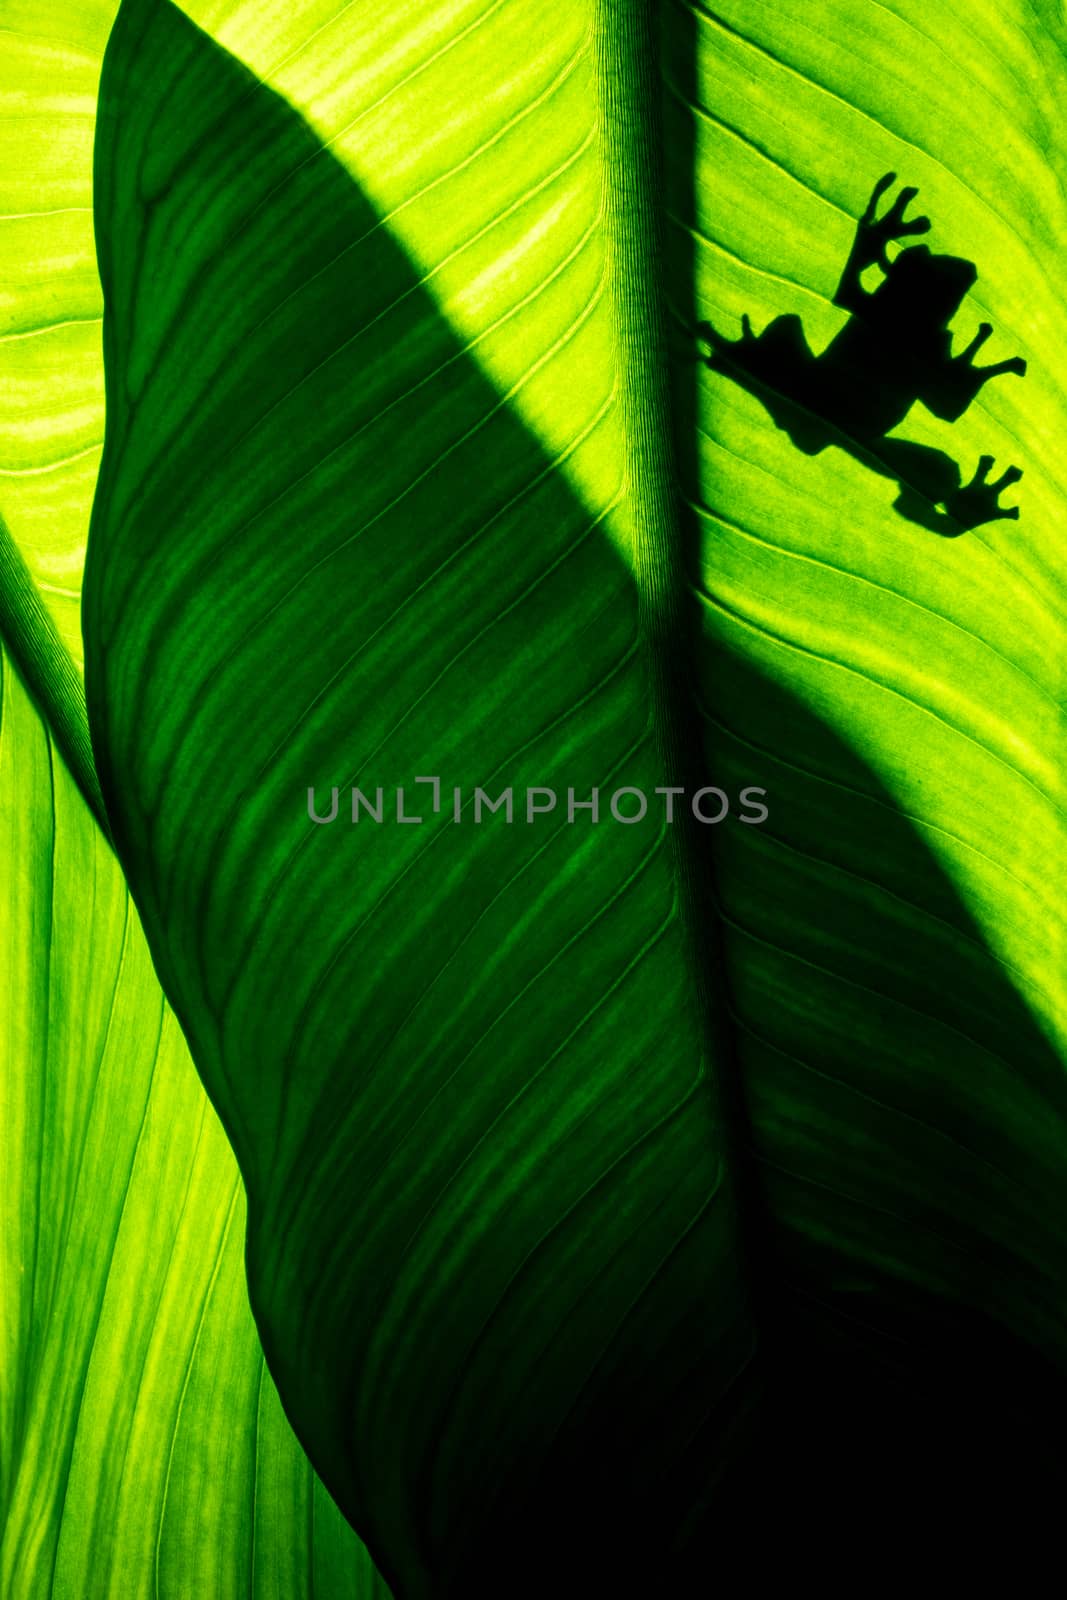 Frog shadow on natural green leaf background, tropical foliage texture.